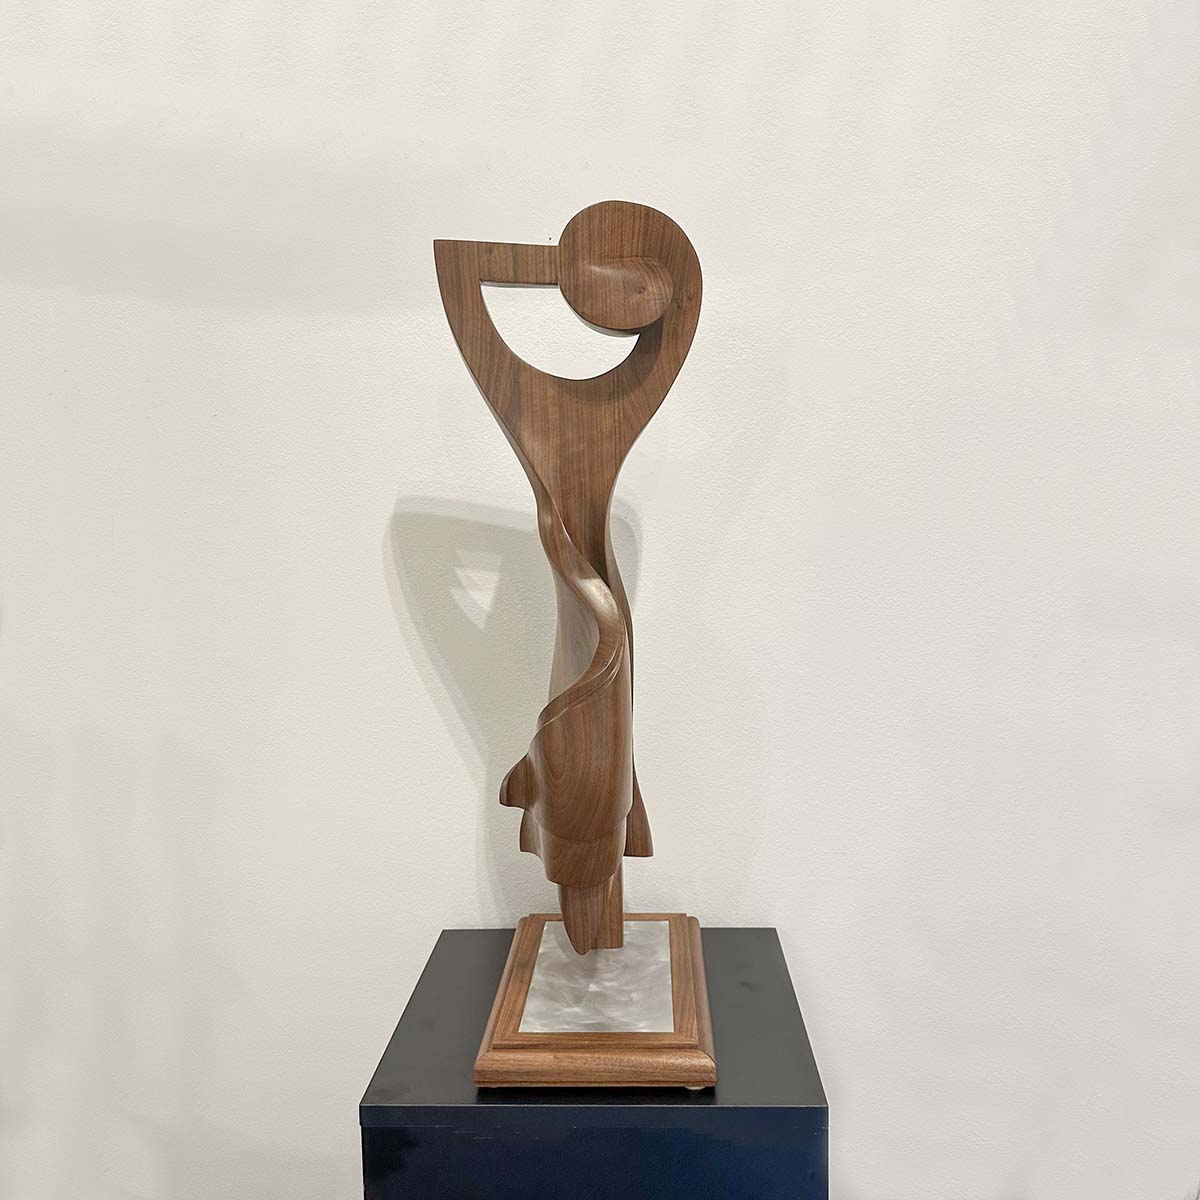 Contemporary Sculpture. Title: In Love with Dance, Black Walnut, 28x12x10 by Canadian sculptor Serge Mozhnevsky.